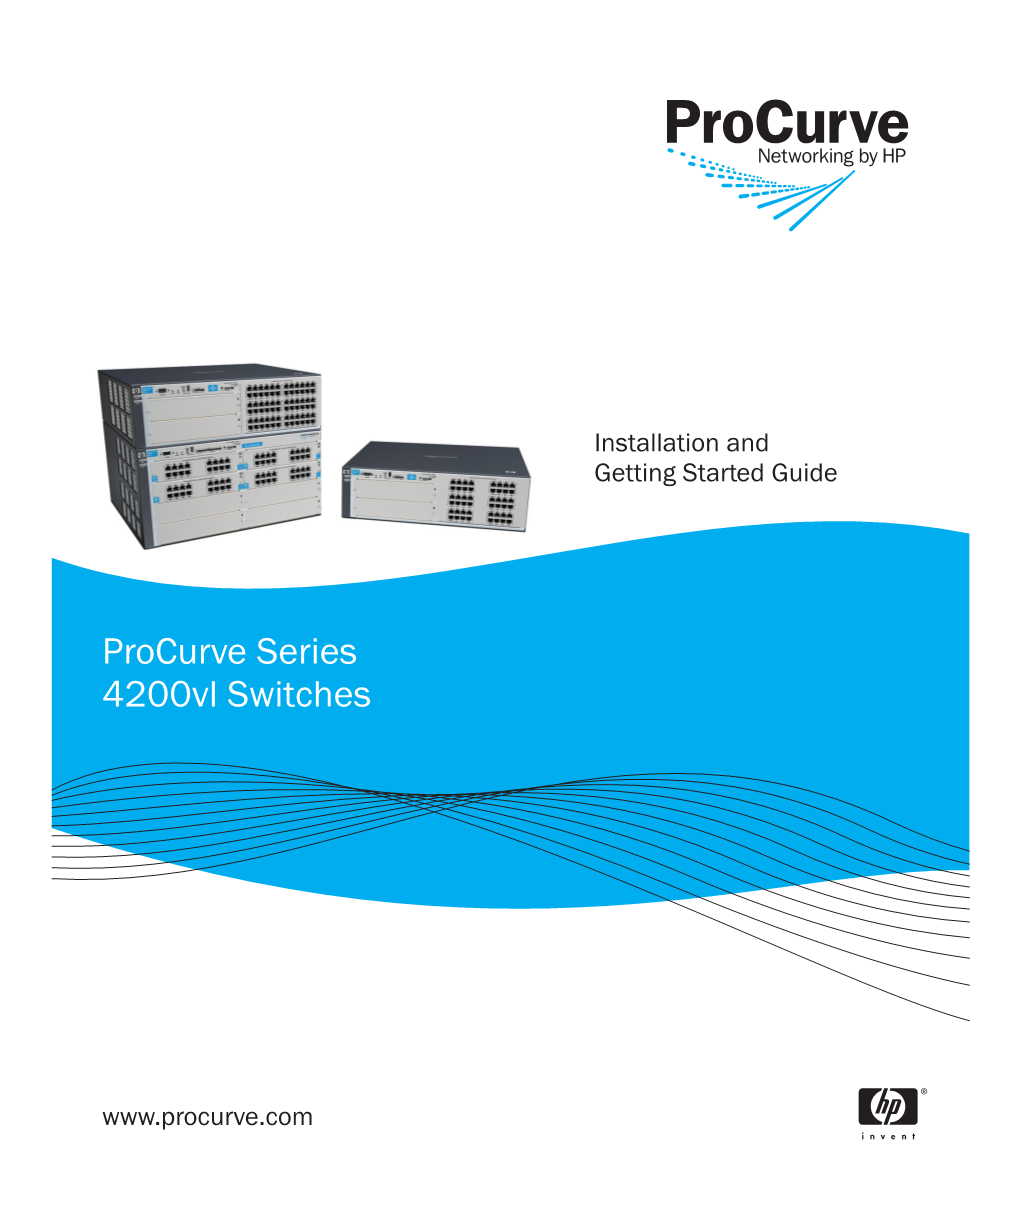 Installation and Getting Started Guide for the Procurve Series 4200Vl